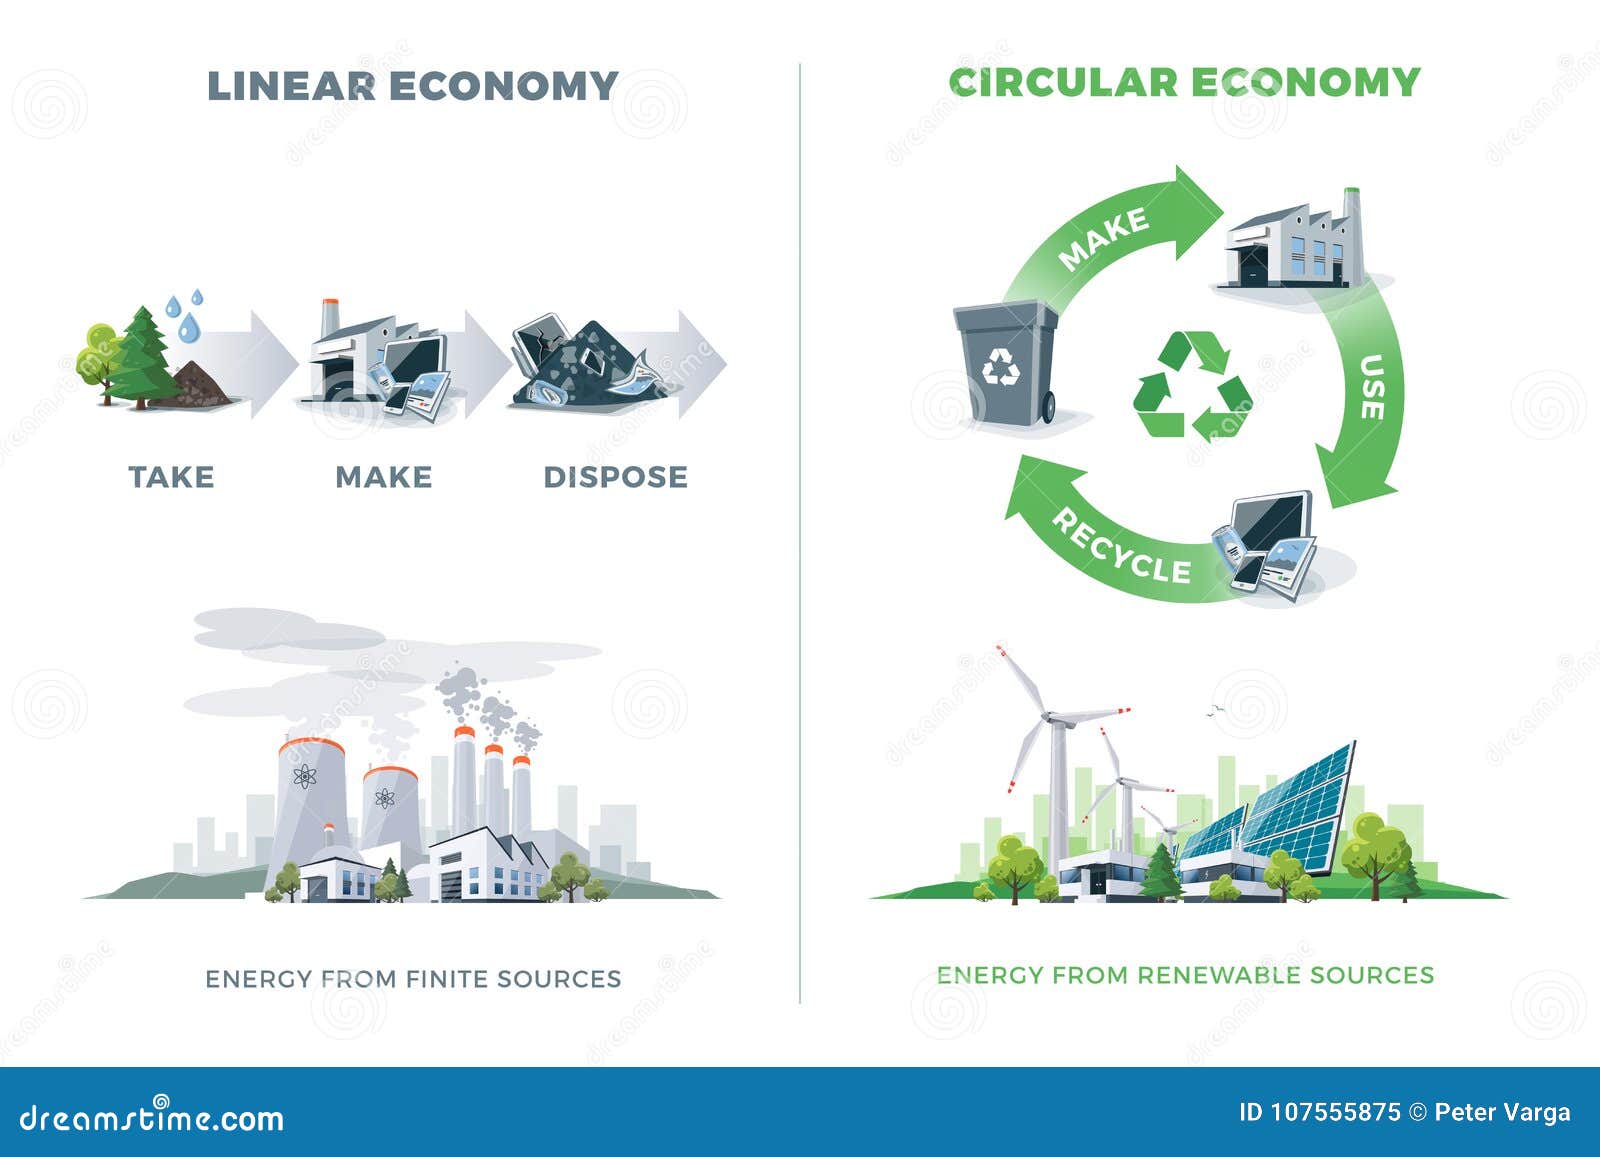 comparing circular and linear economy